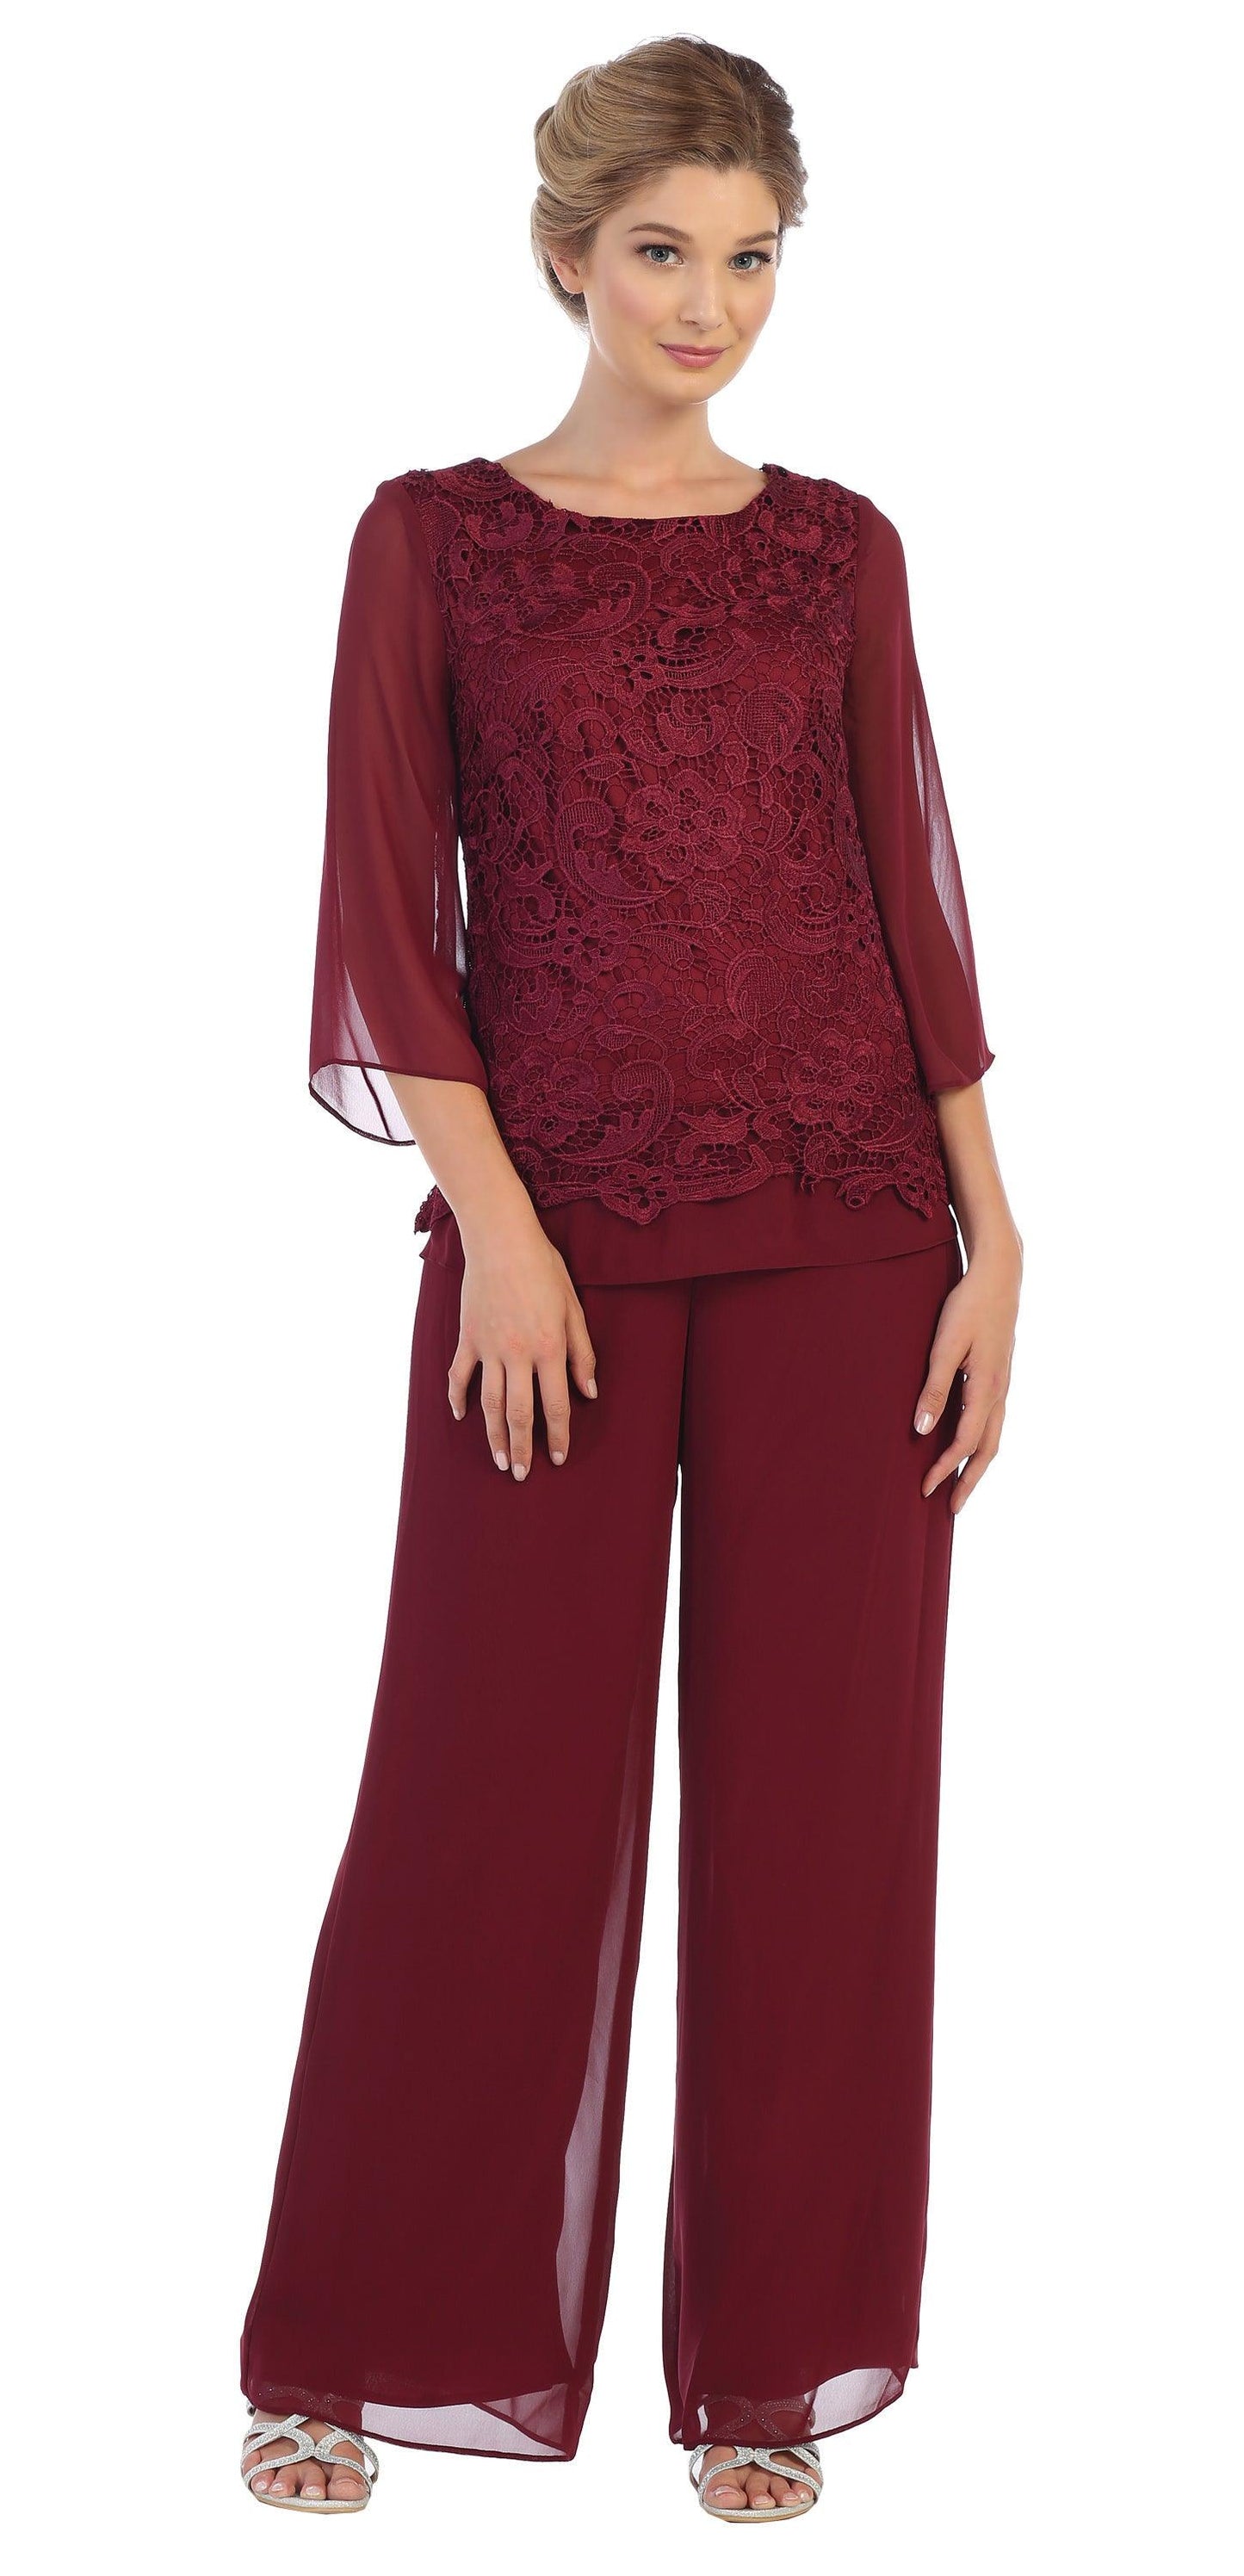 Formal 2 Piece Mother of the Bride Lace Pant Suit - The Dress Outlet